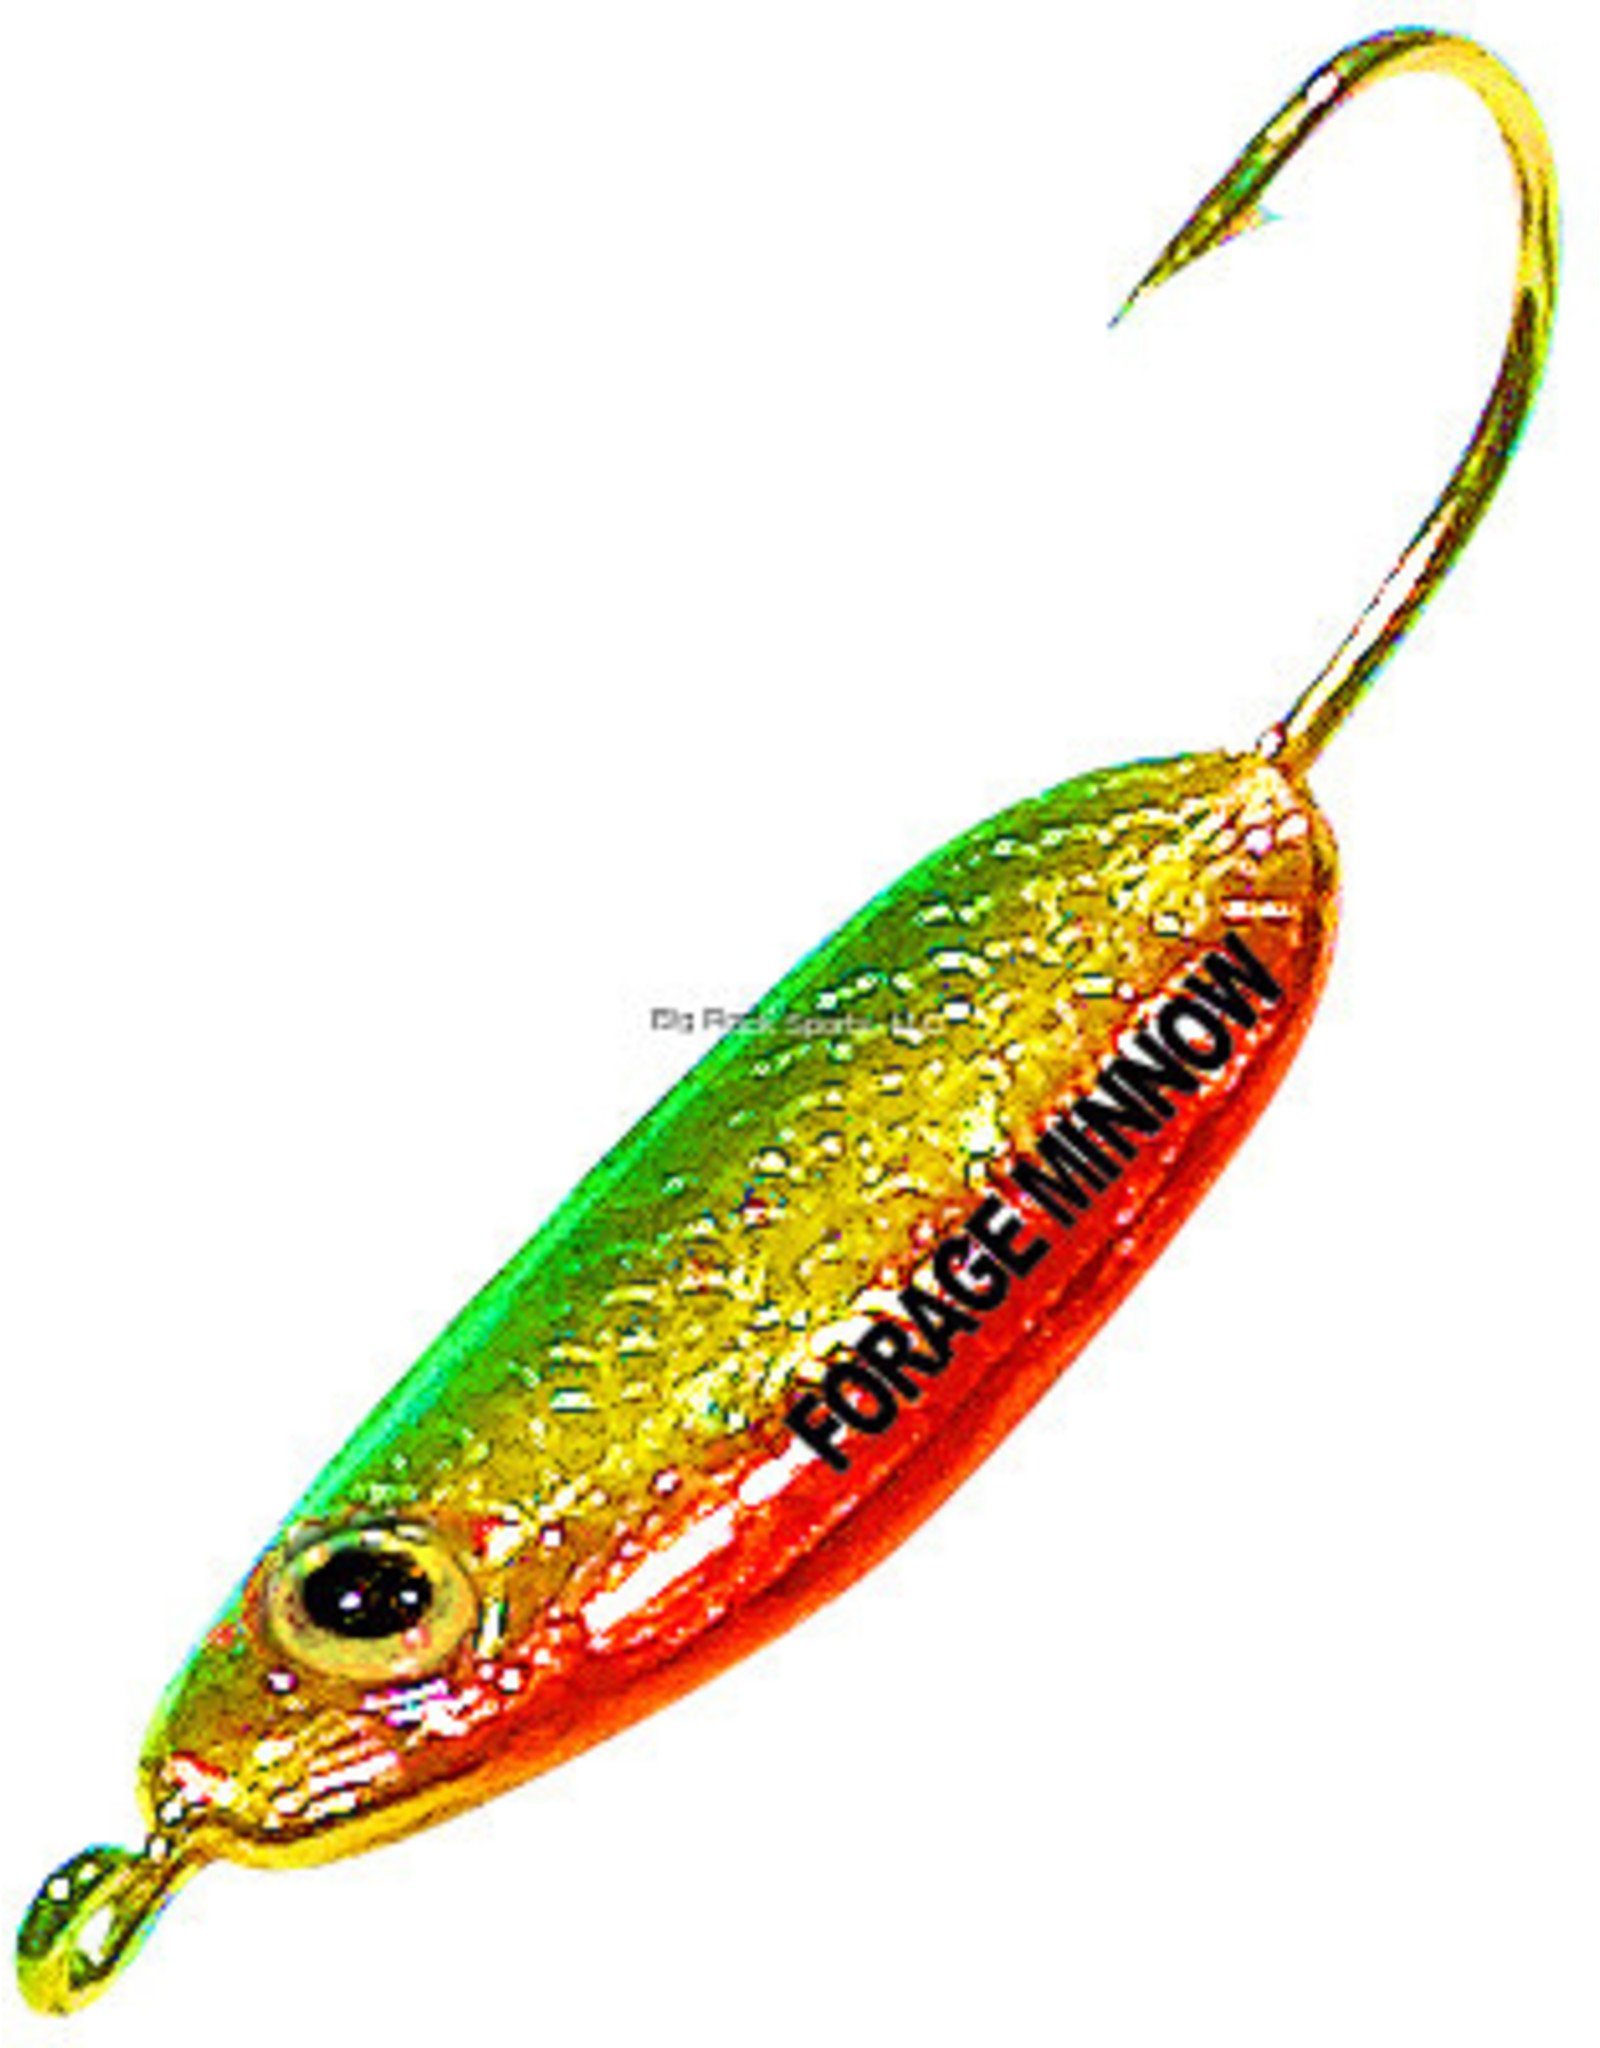 Northland FMJ8-23 Holographic Forage Minnow Jig #8 Golden Perch